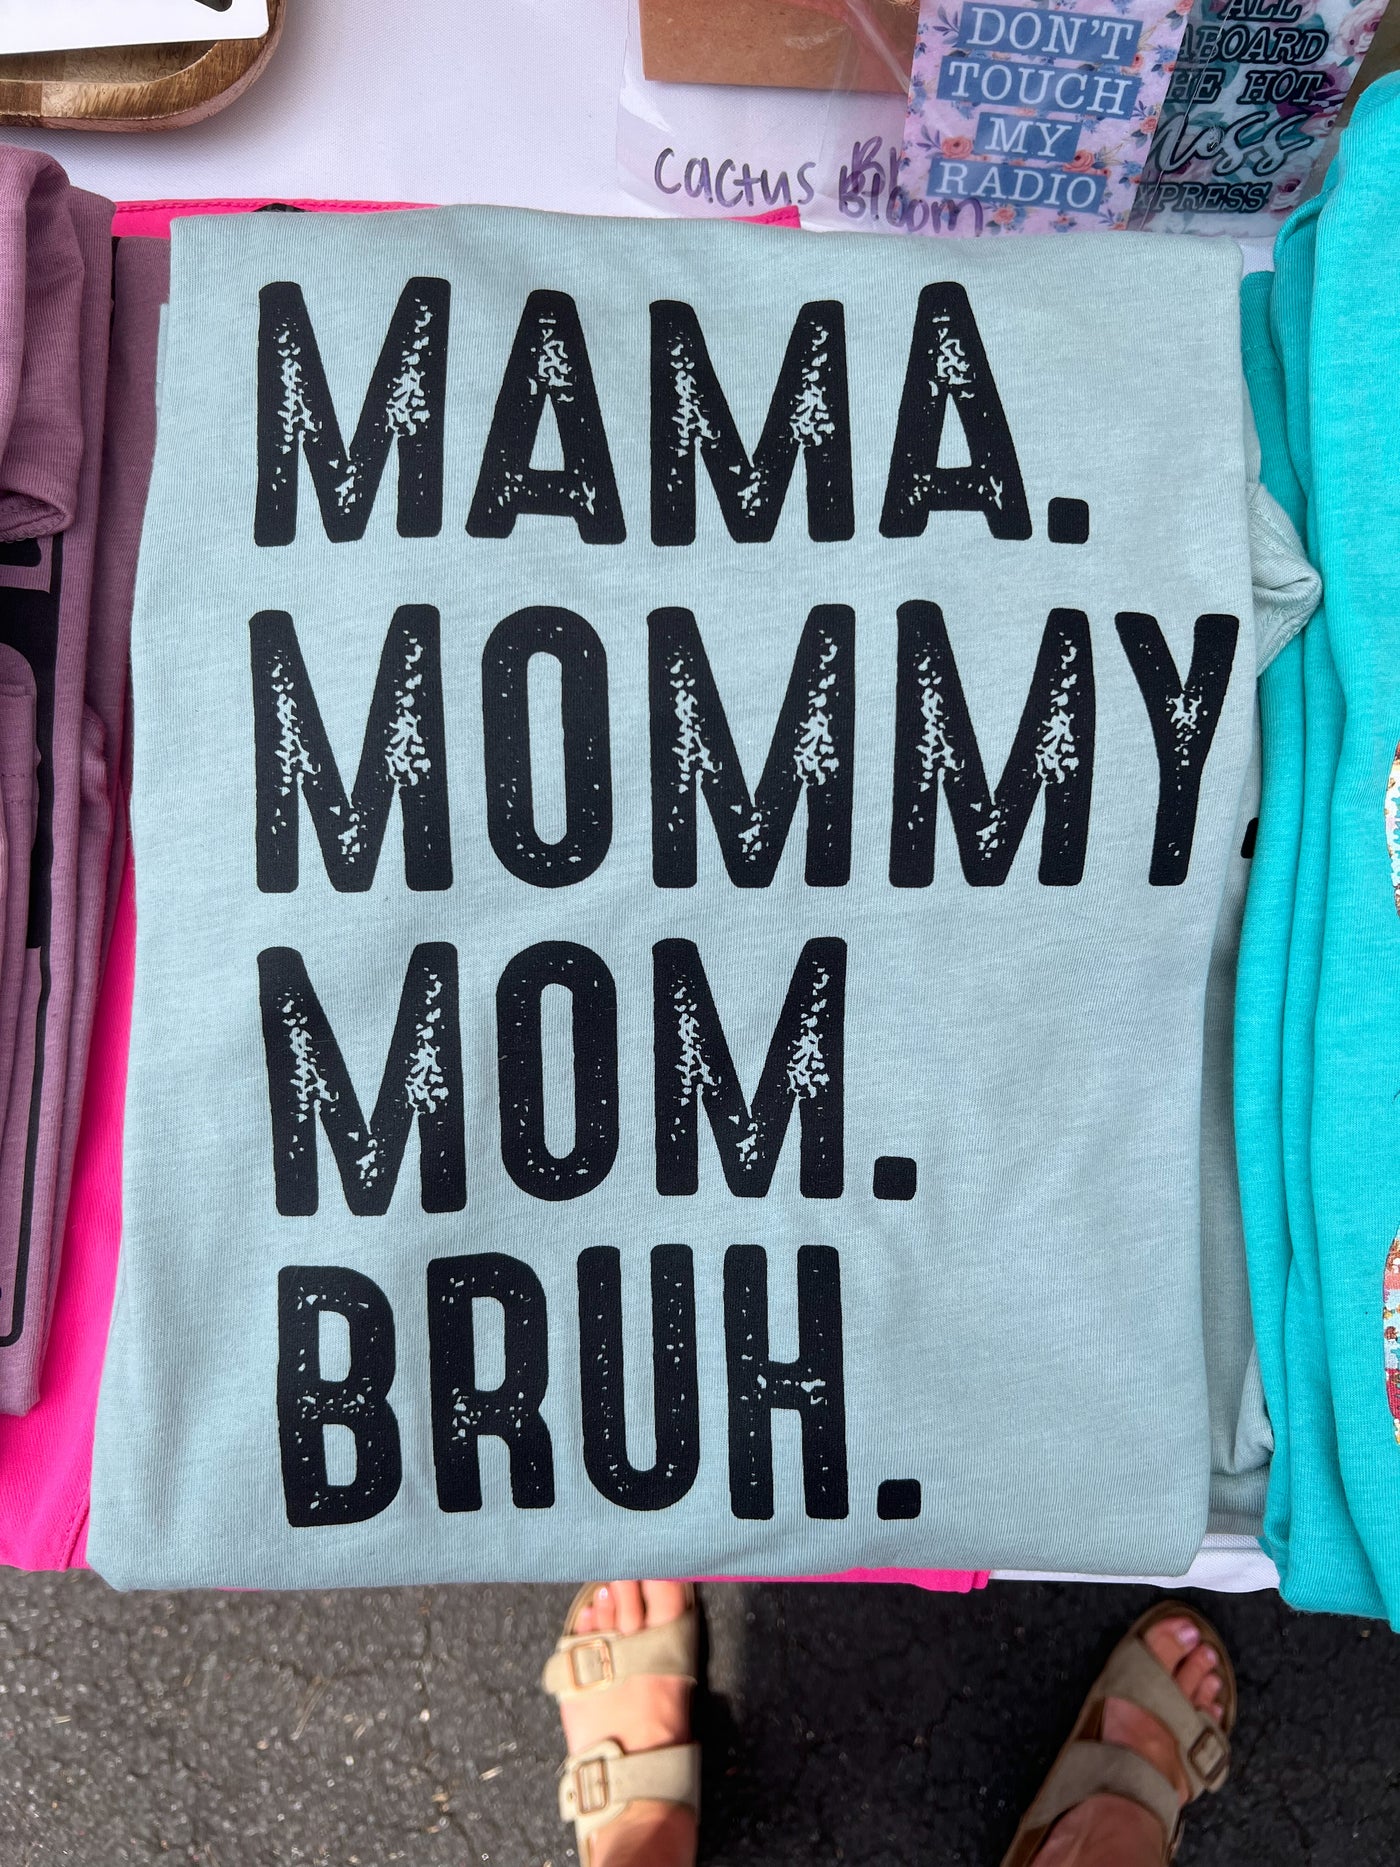 CLEARANCE "Mama Mommy Mom Bruh" T-shirt